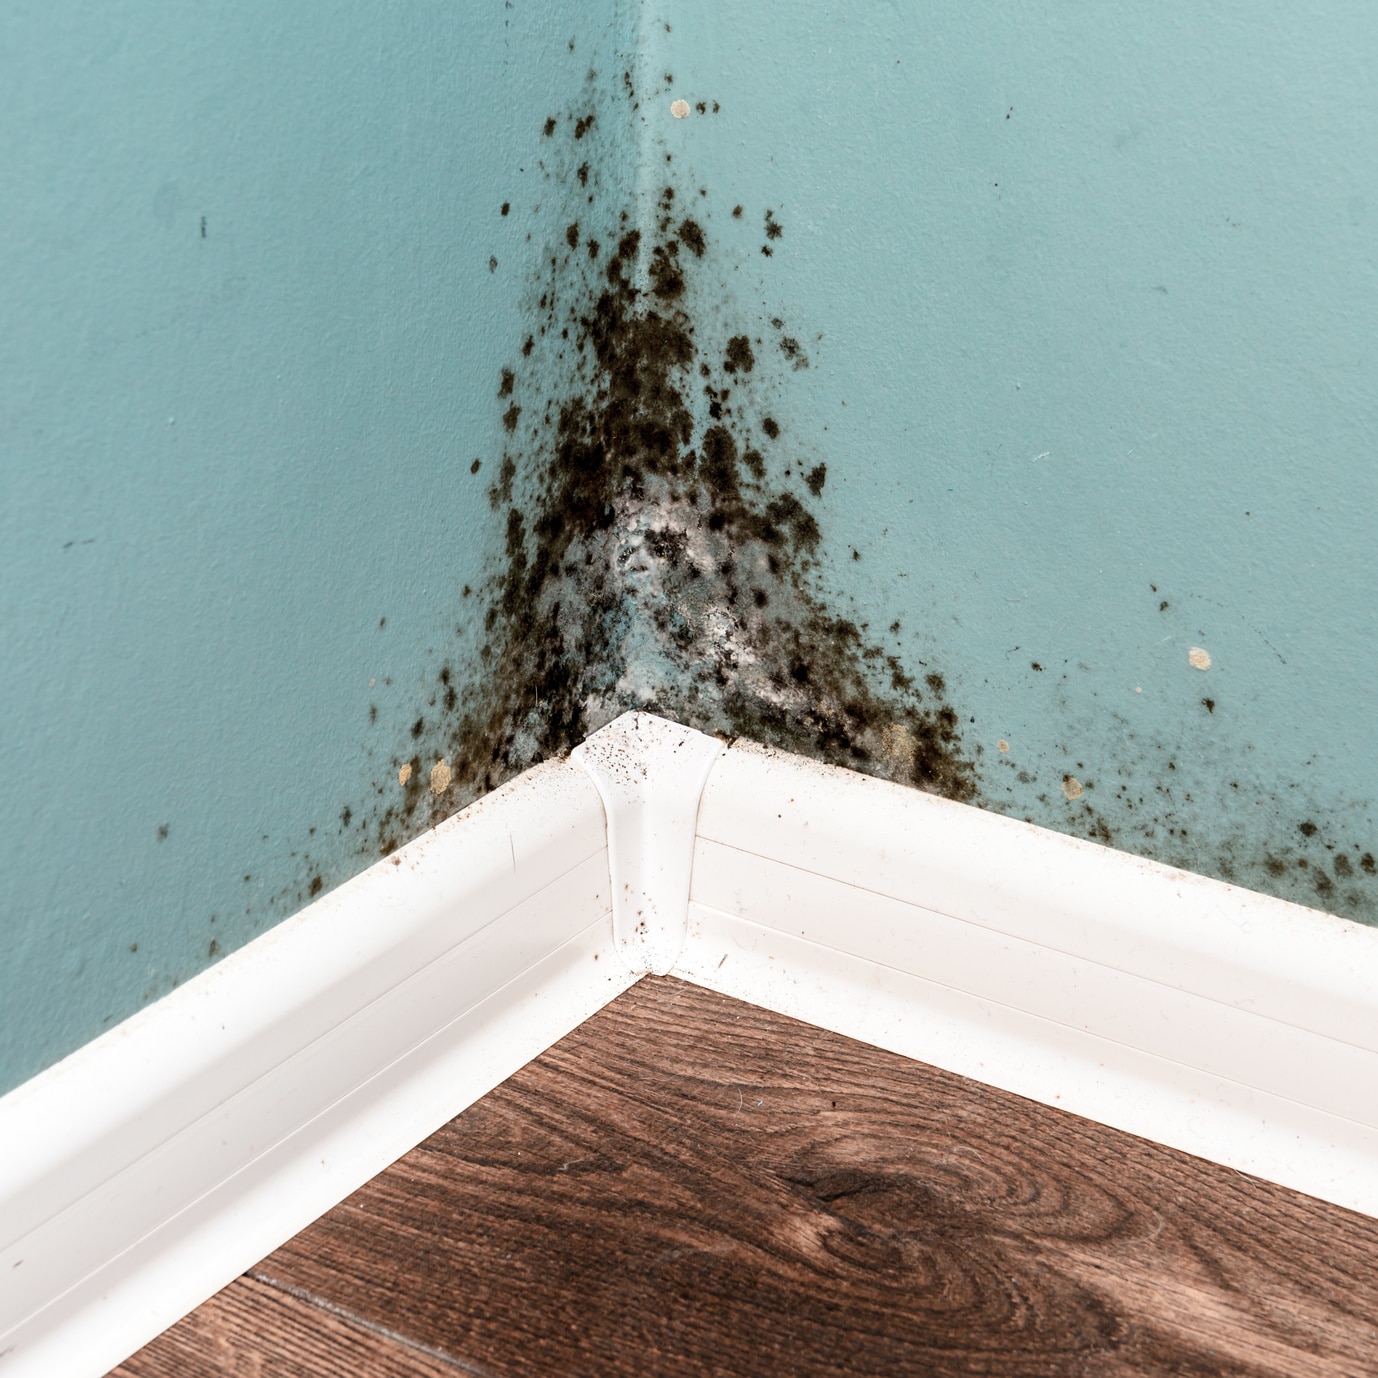 Black mold in the basement